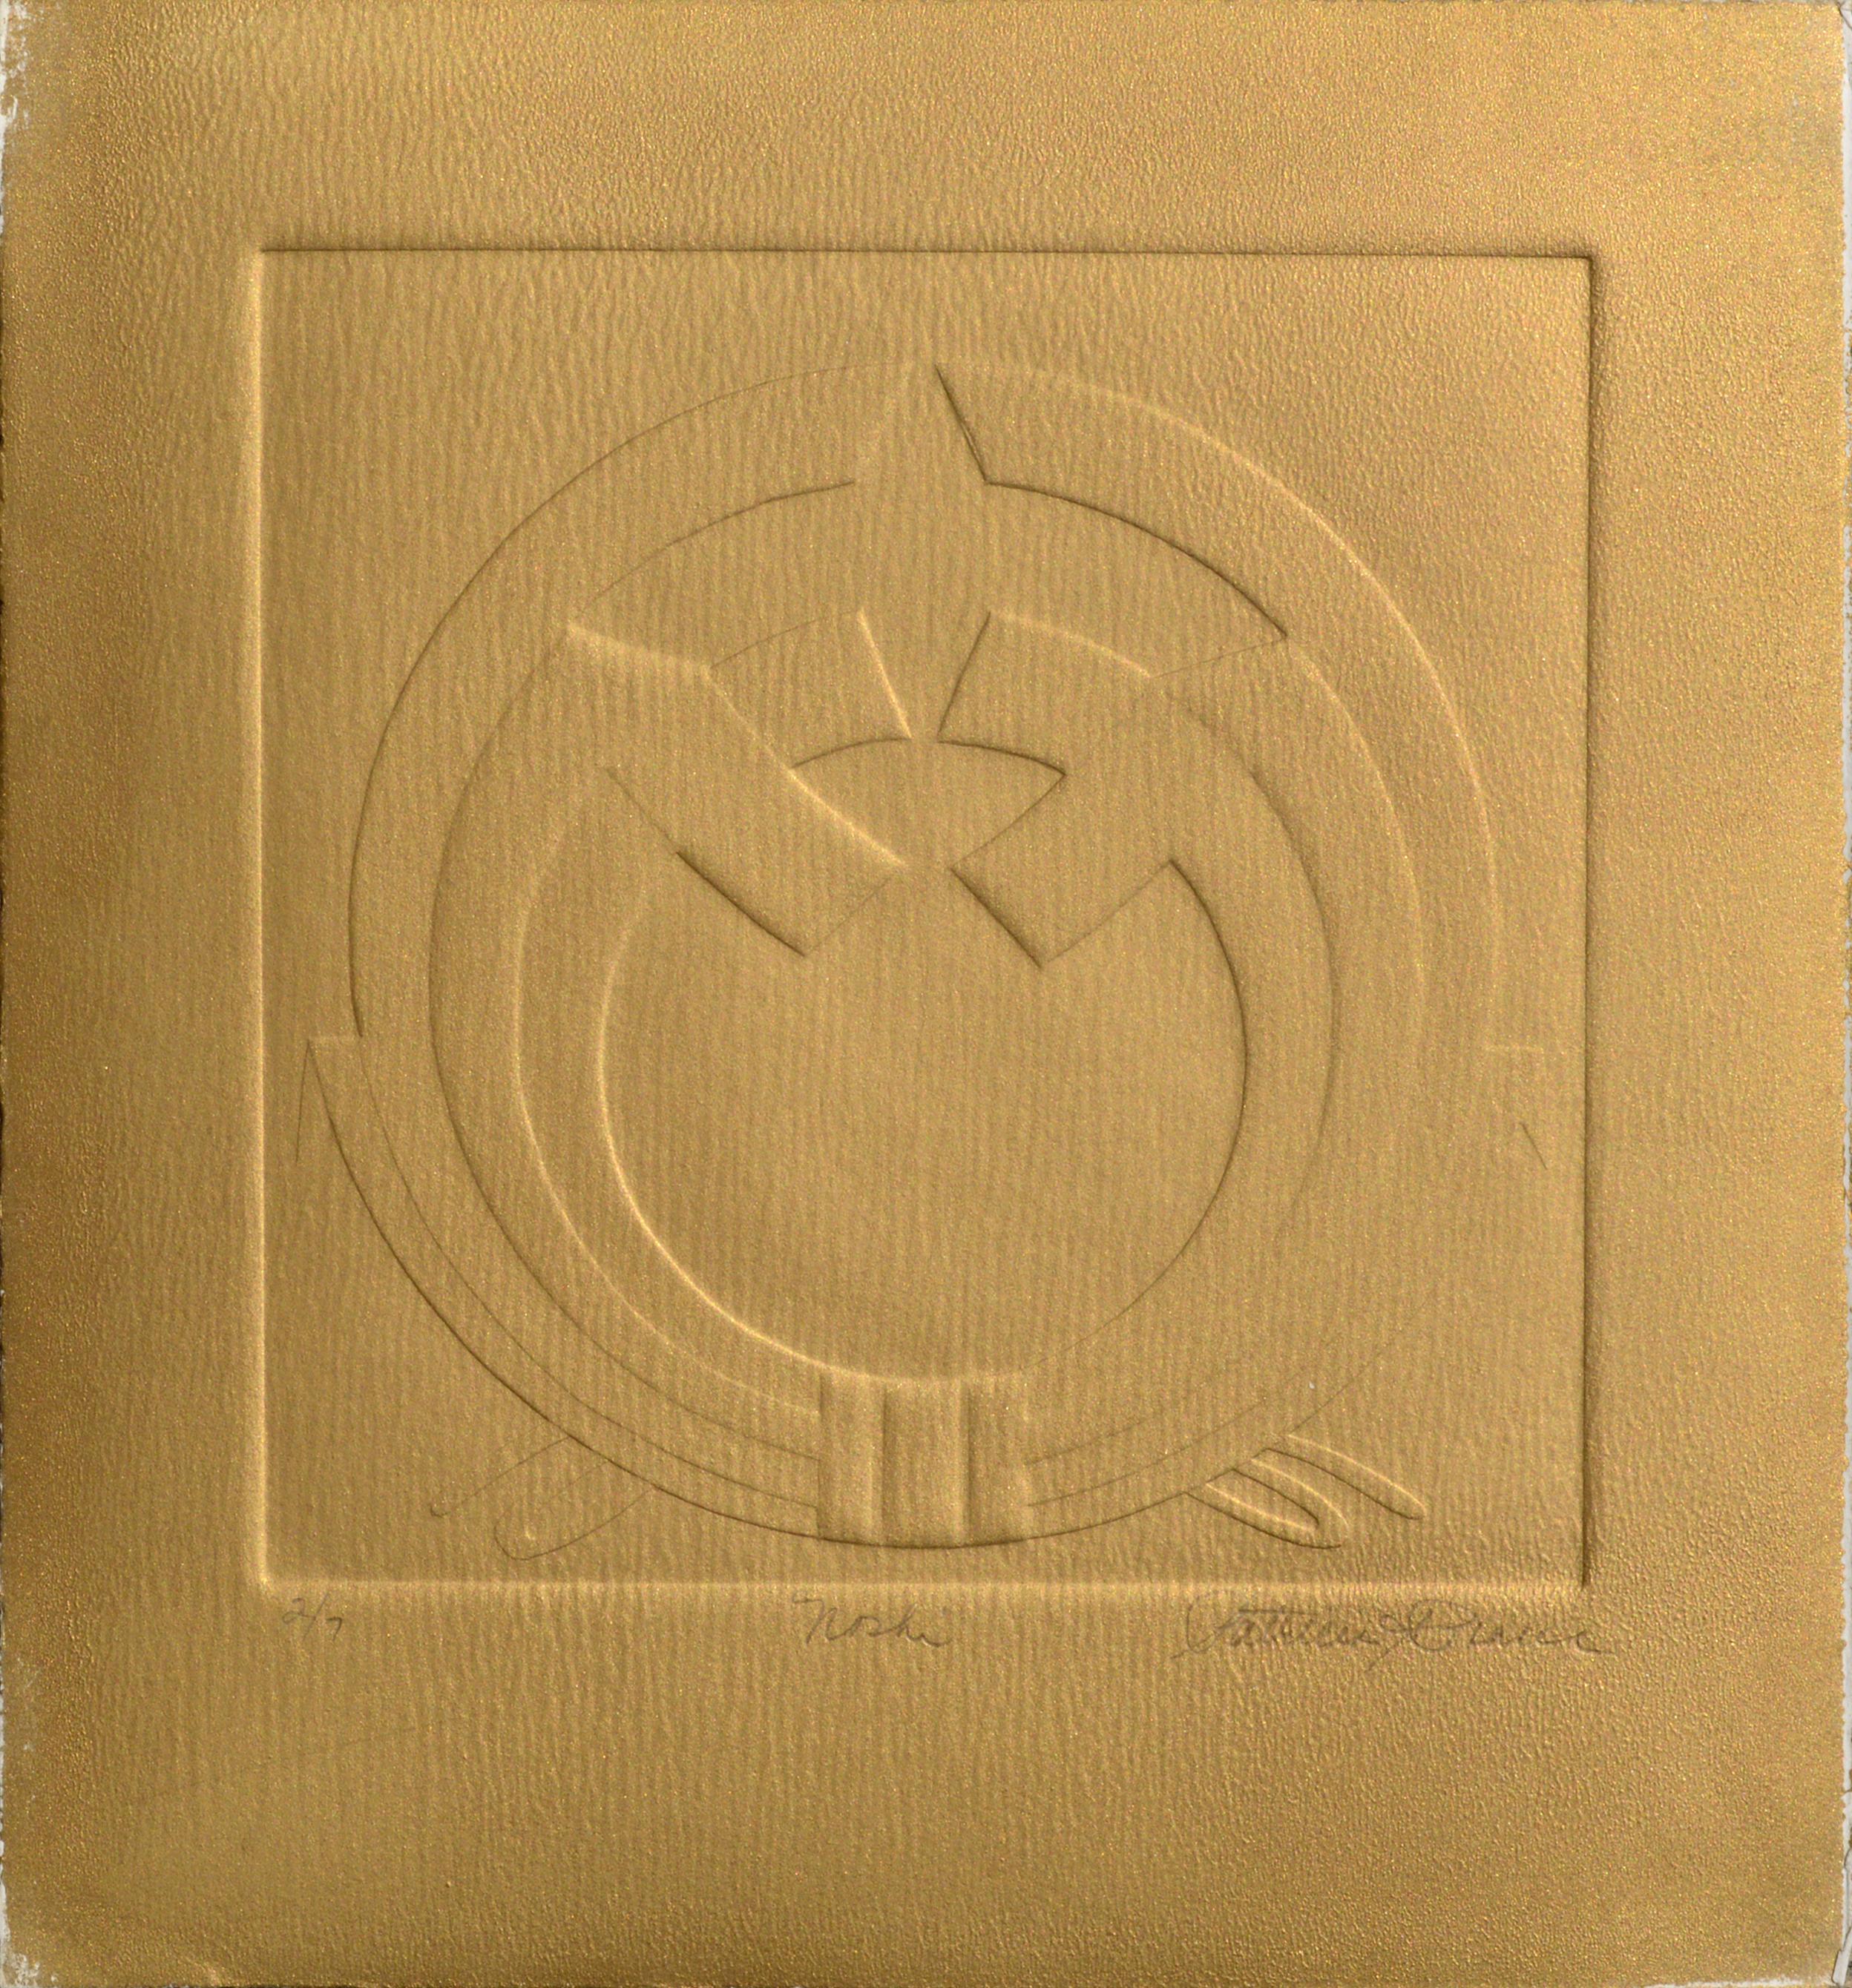 Patricia A Pearce Abstract Print - "Noshi" Embossed Symbolic Composition (Bronze Version)